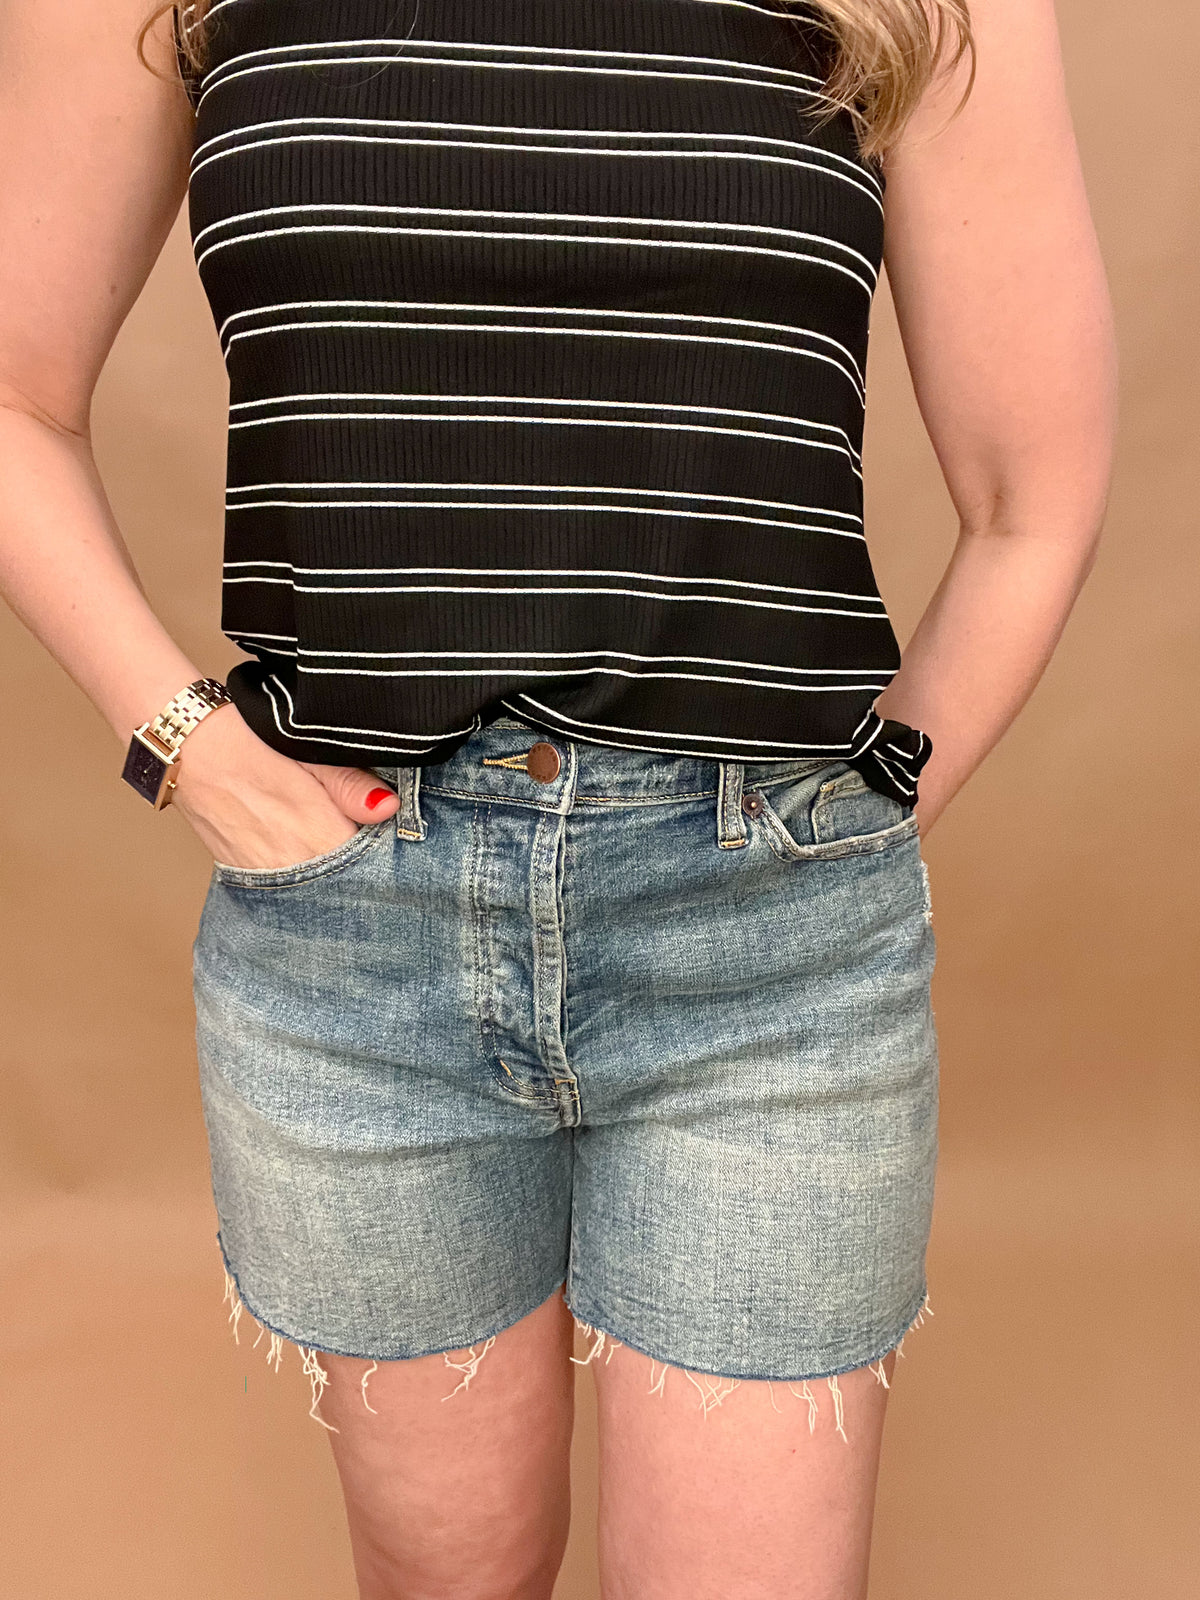 Our best selling Oliver Logan Denim Cut Above shorts are back in stock and ready for warm weather!&nbsp; The relaxed, comfy fit sits high on the waist and cuts off at the thigh. Made from yarn sourced from the Better Cotton Initiative (BCI), these denim shorts feature a buttoned fly and raw hem.&nbsp;